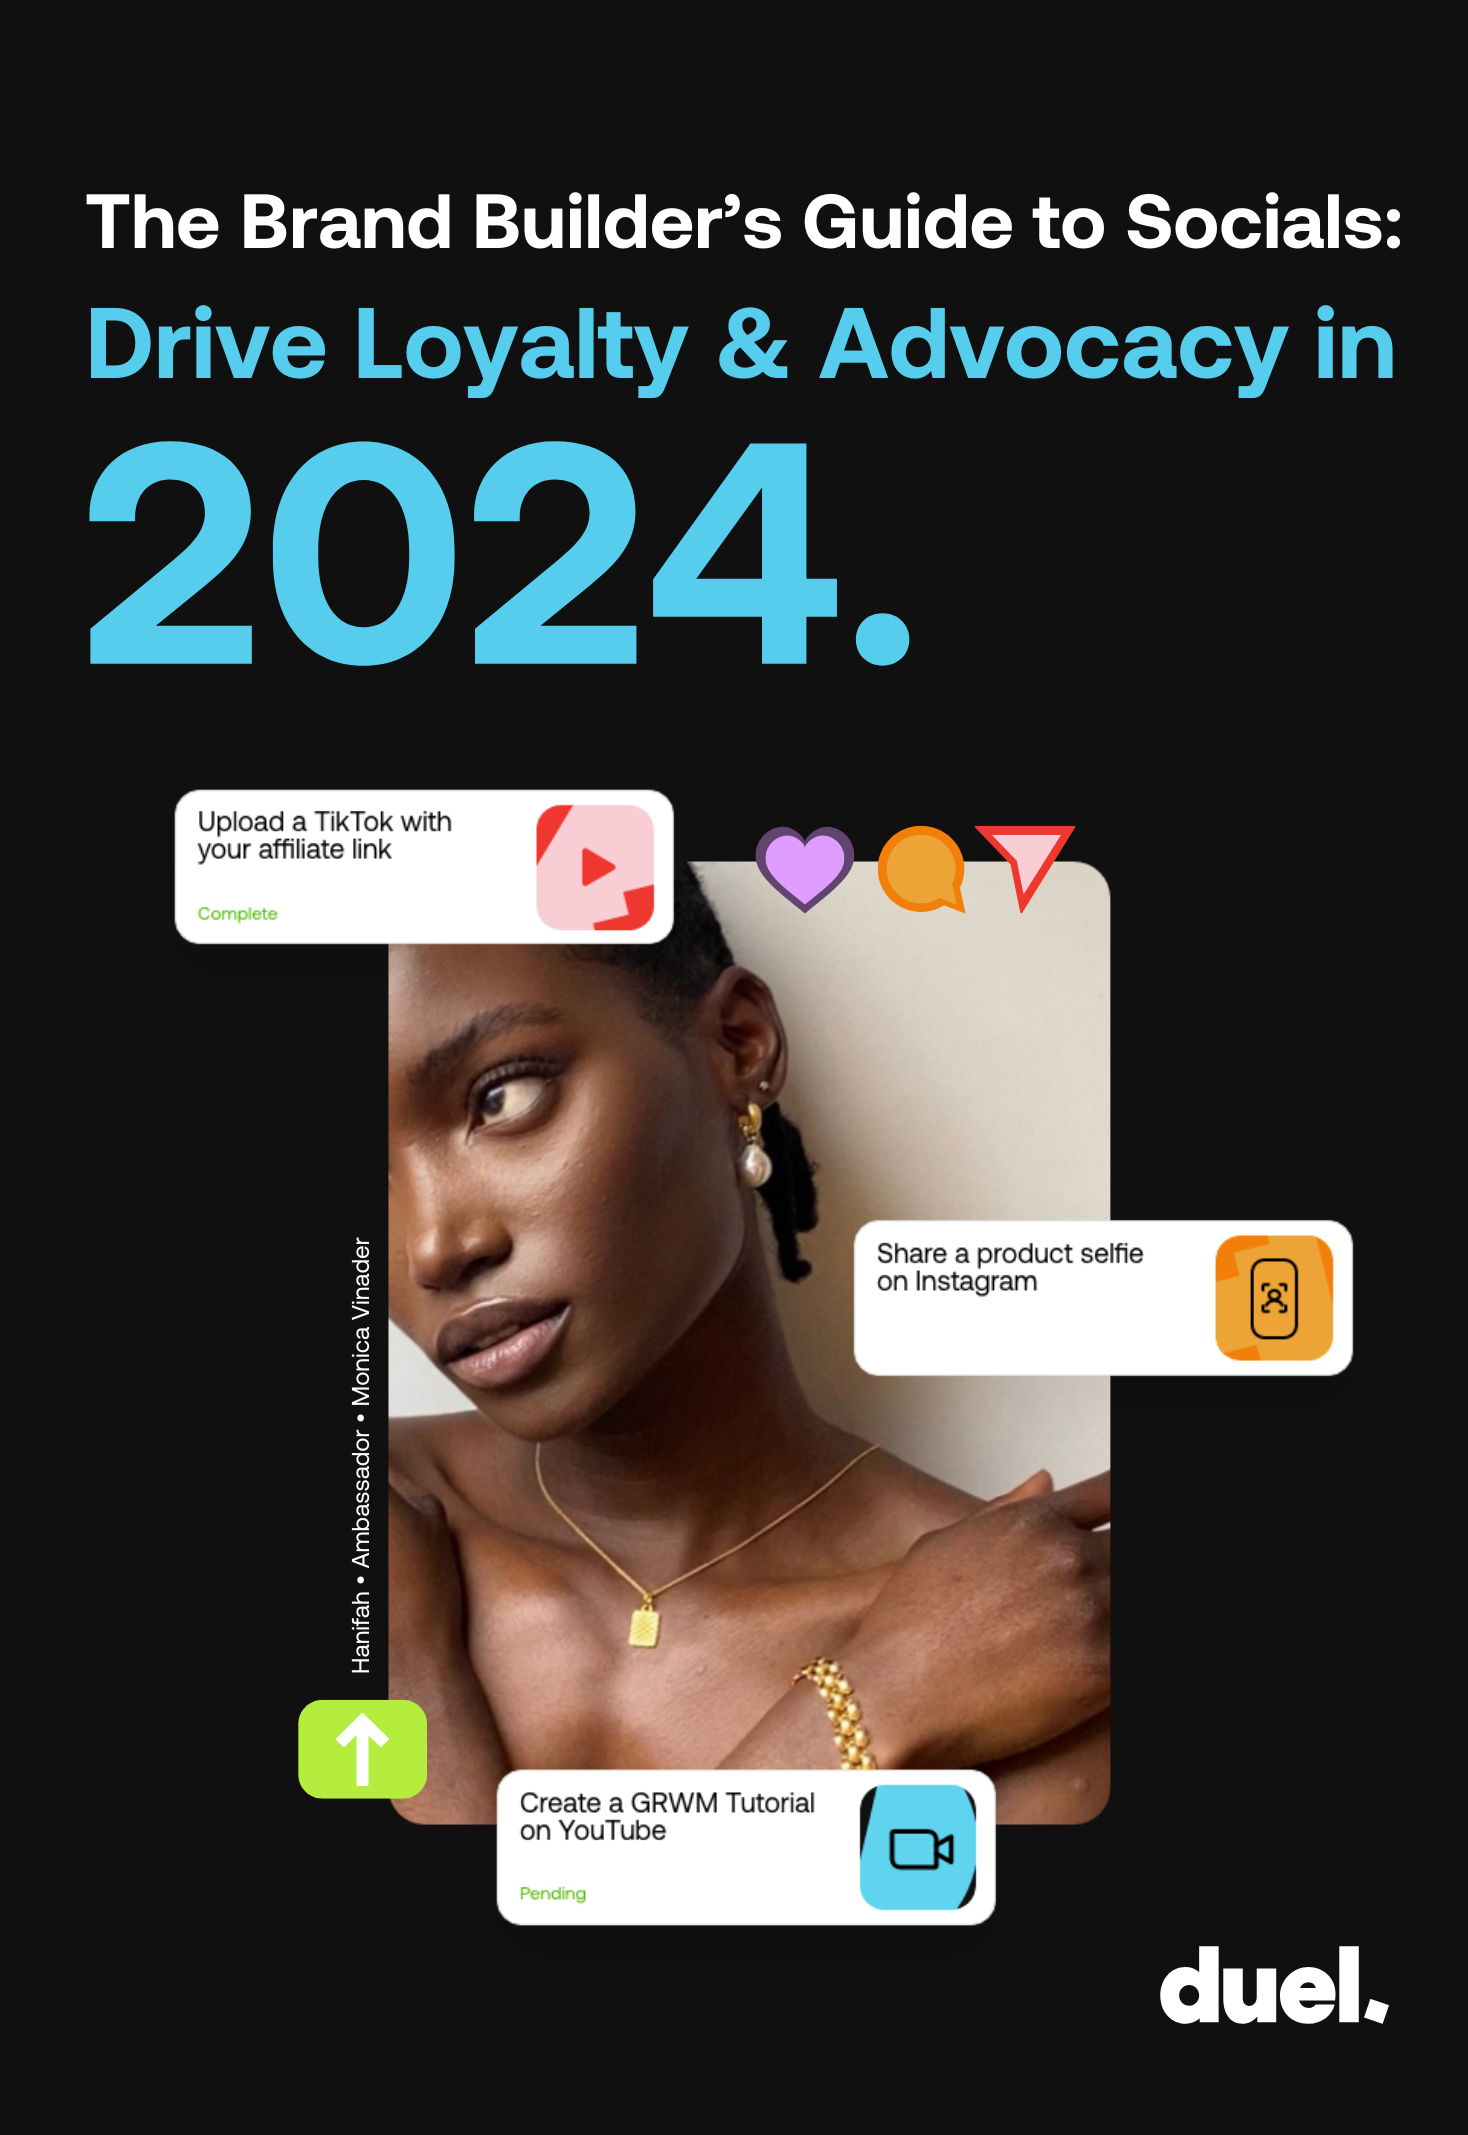 The Brand Builders Guide to Socials – Drive Loyalty & Advocacy in 2024 (1468 x 2135 px)